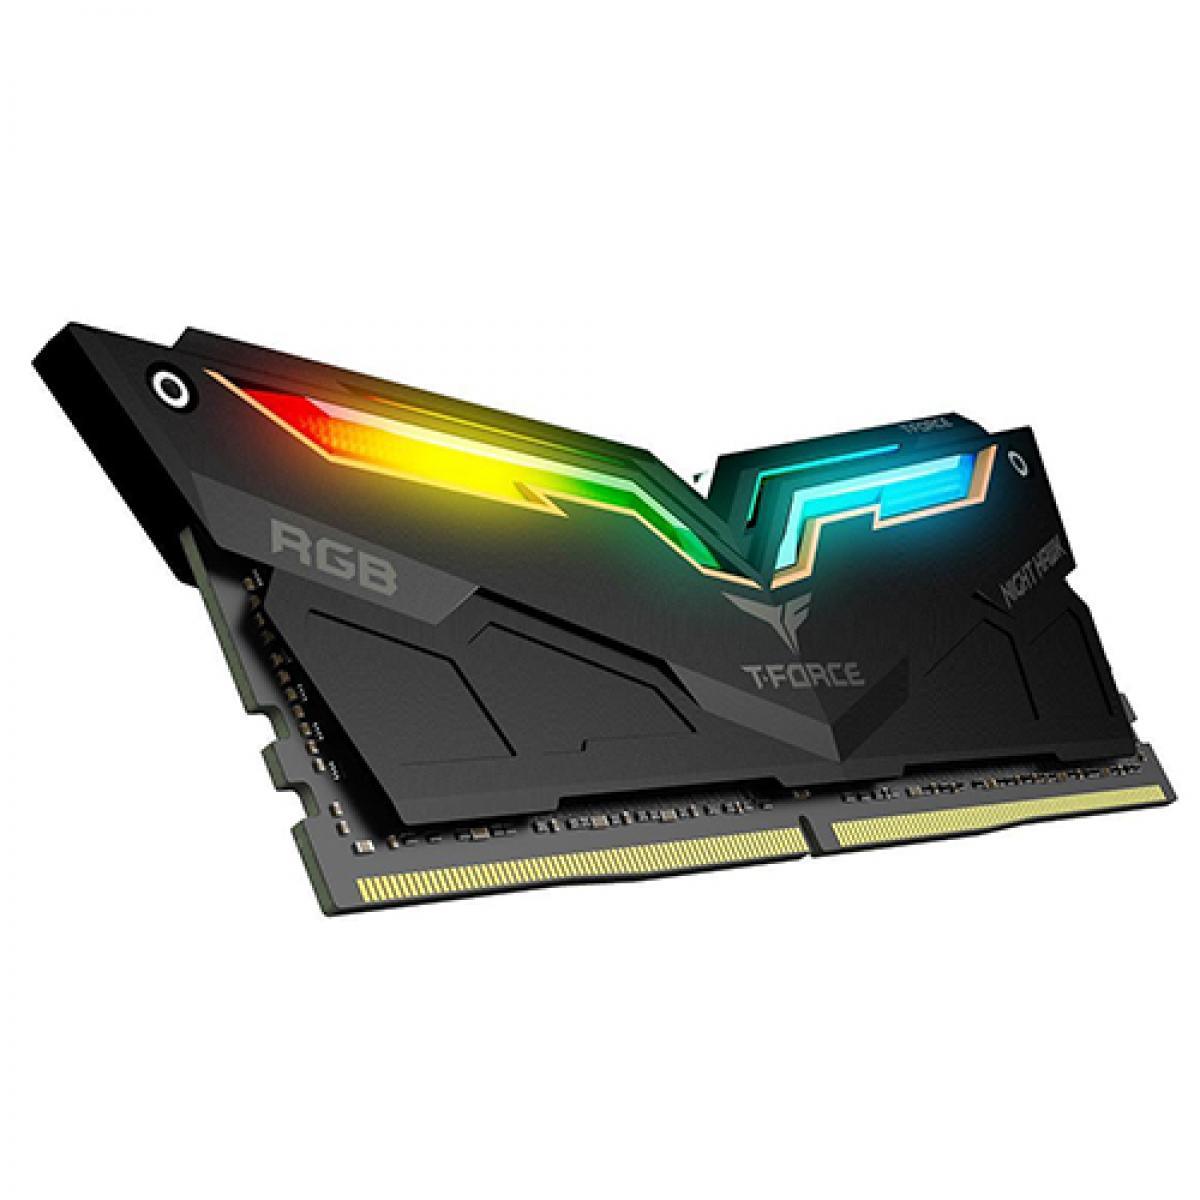 TEAMGROUP RAM TeamGroup T-force night hawk rgb 16gb 2x8 3200mhz ddr4 gaming memory